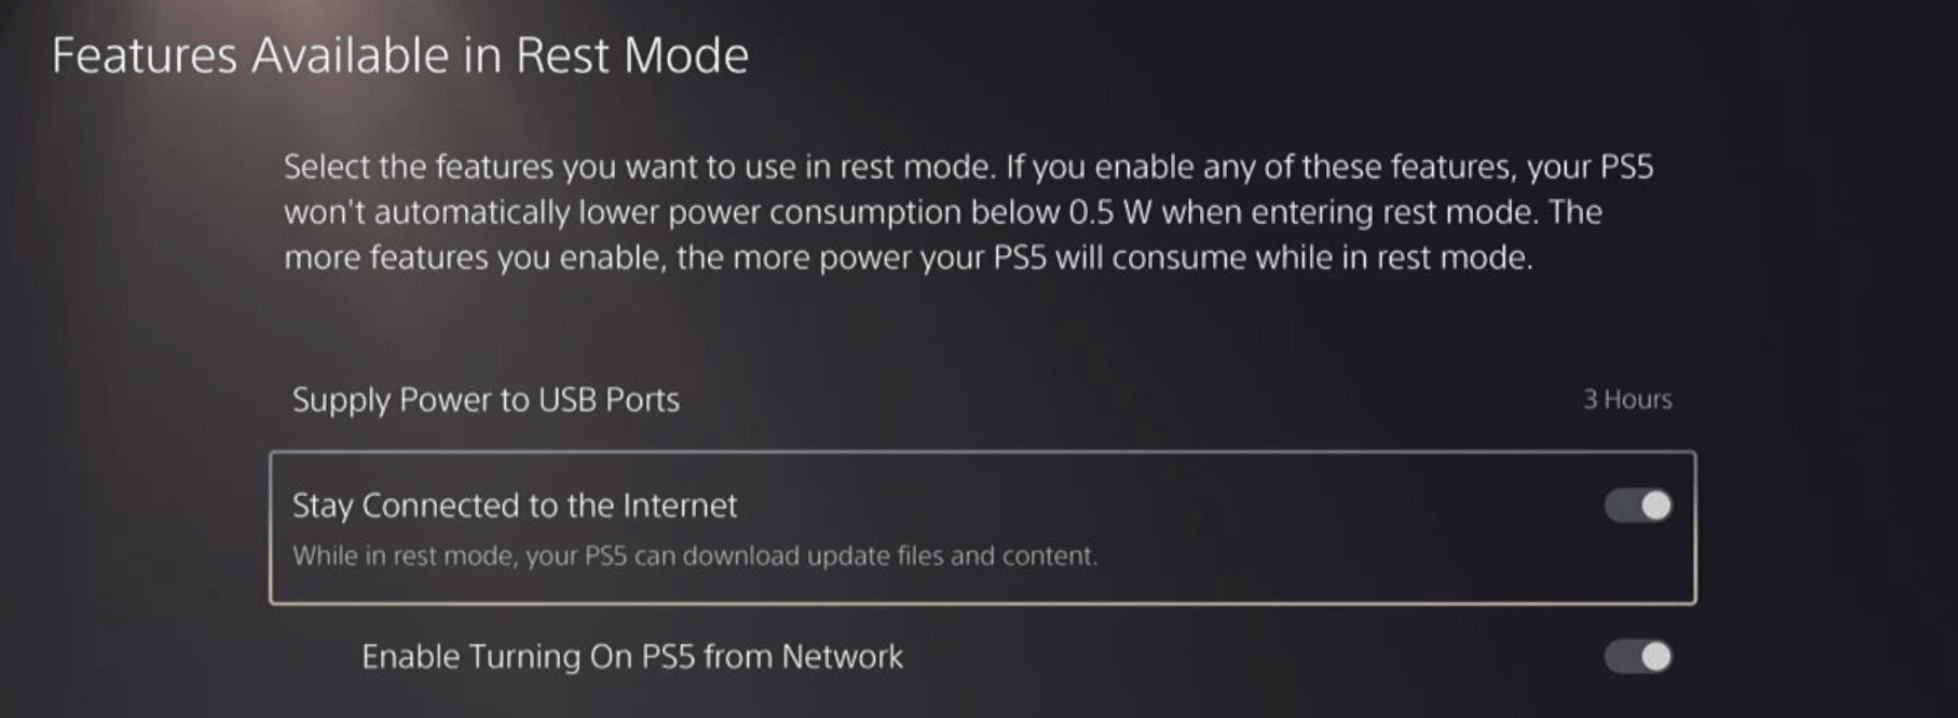 Stay Connected to the Internet is toggled in PS5 rest mode settings menu to enable automatic updates of Warhammer 40,000 Rogue Trader